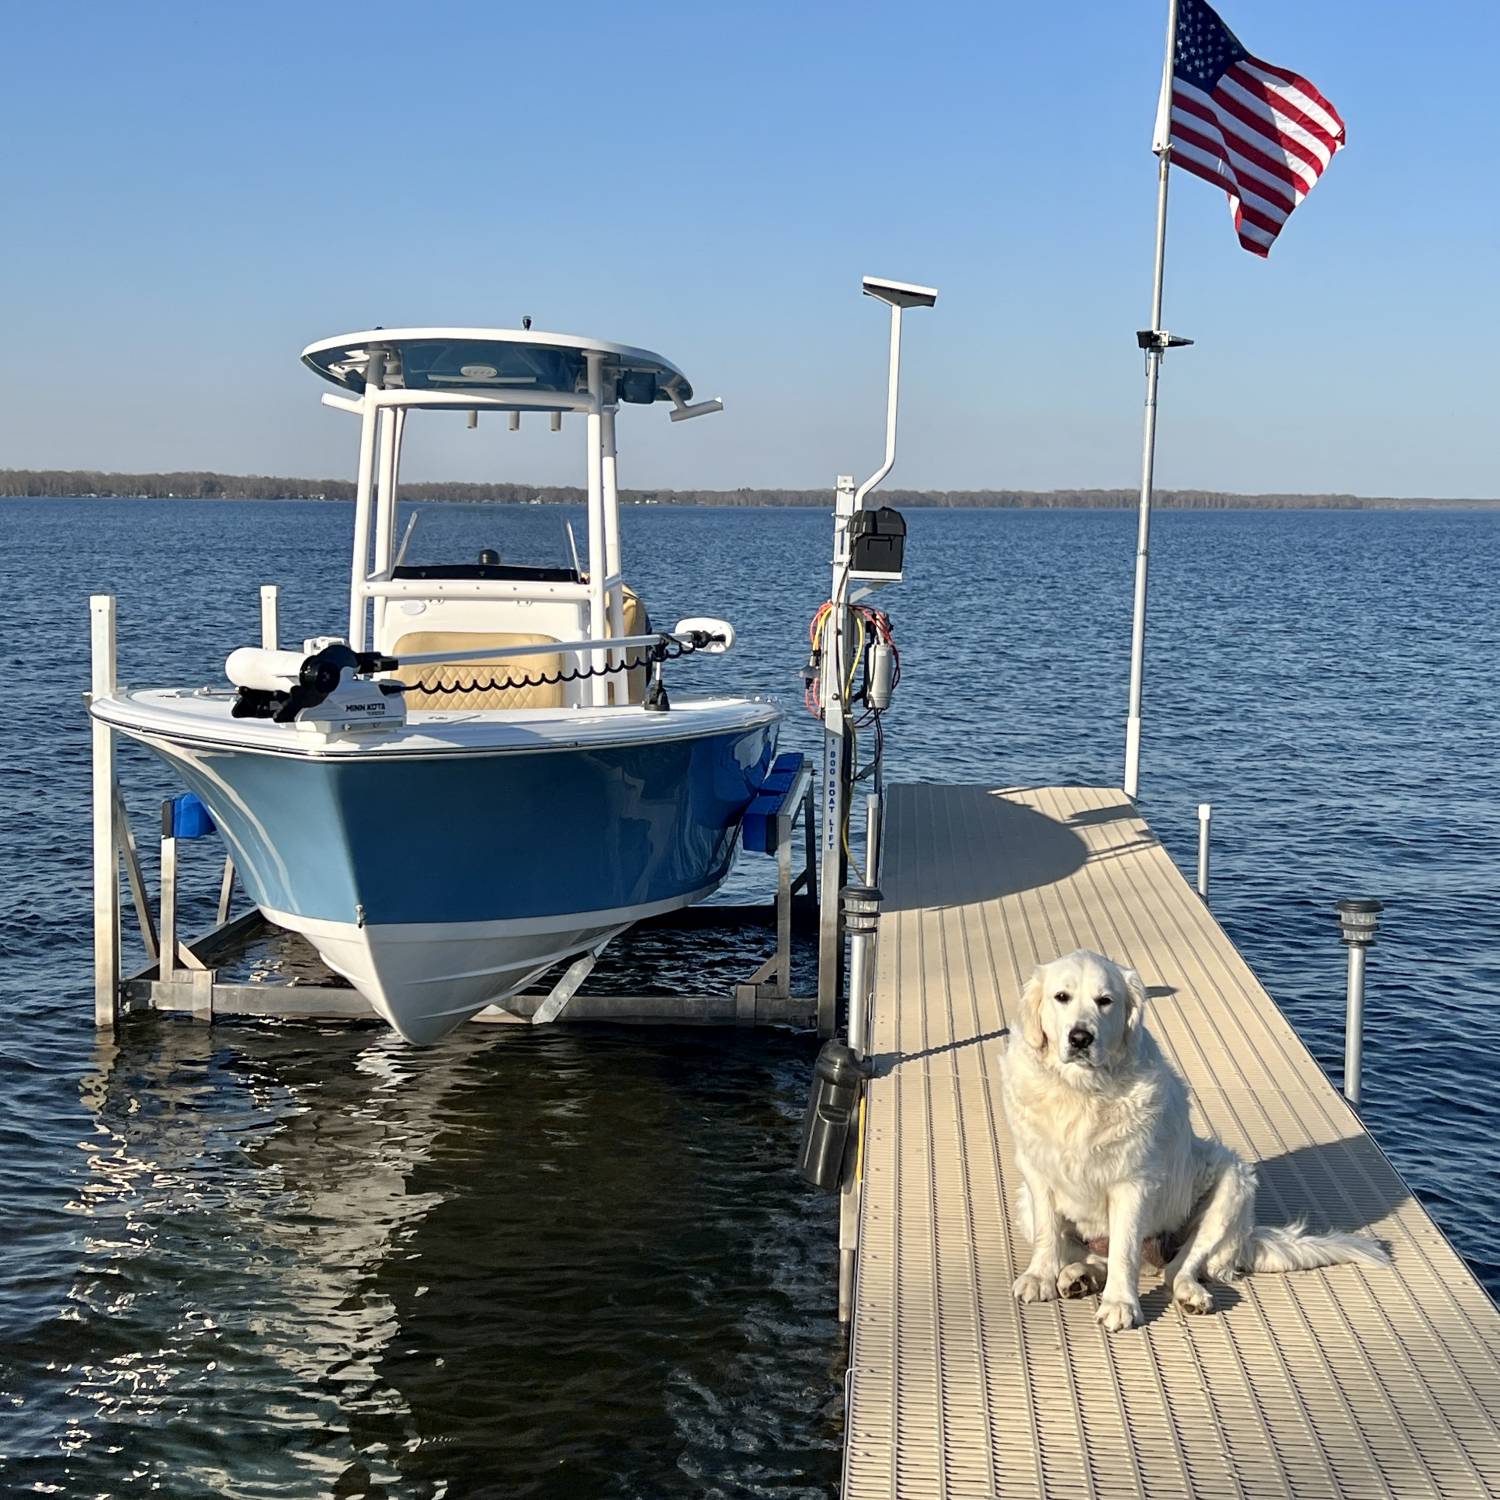 2023 Open 212 ready for Walleye fishing with my English cream golden retriever.